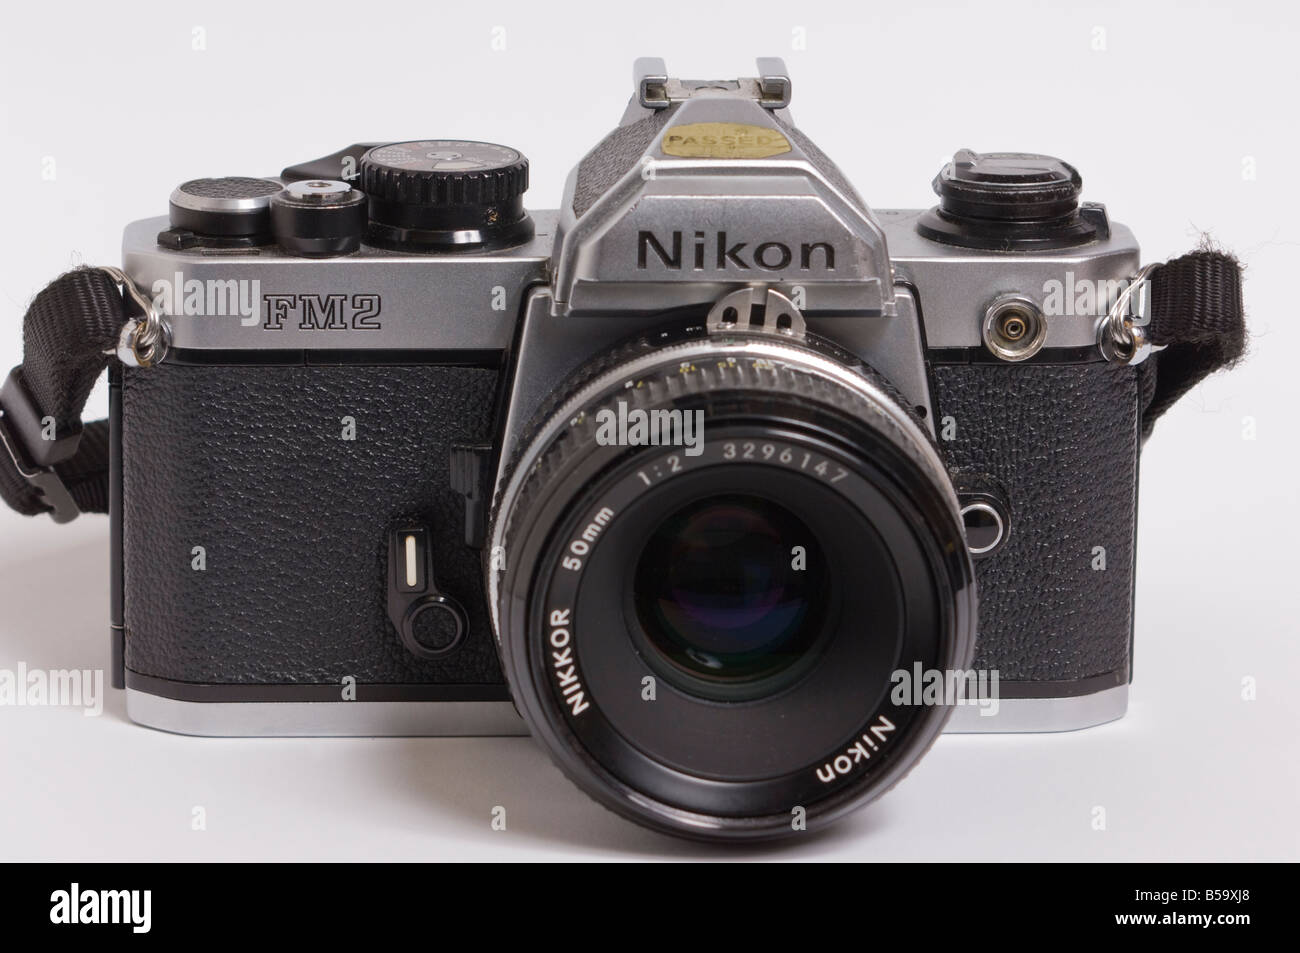 A Professional Nikon FM2 manual 35mm film camera in silver with